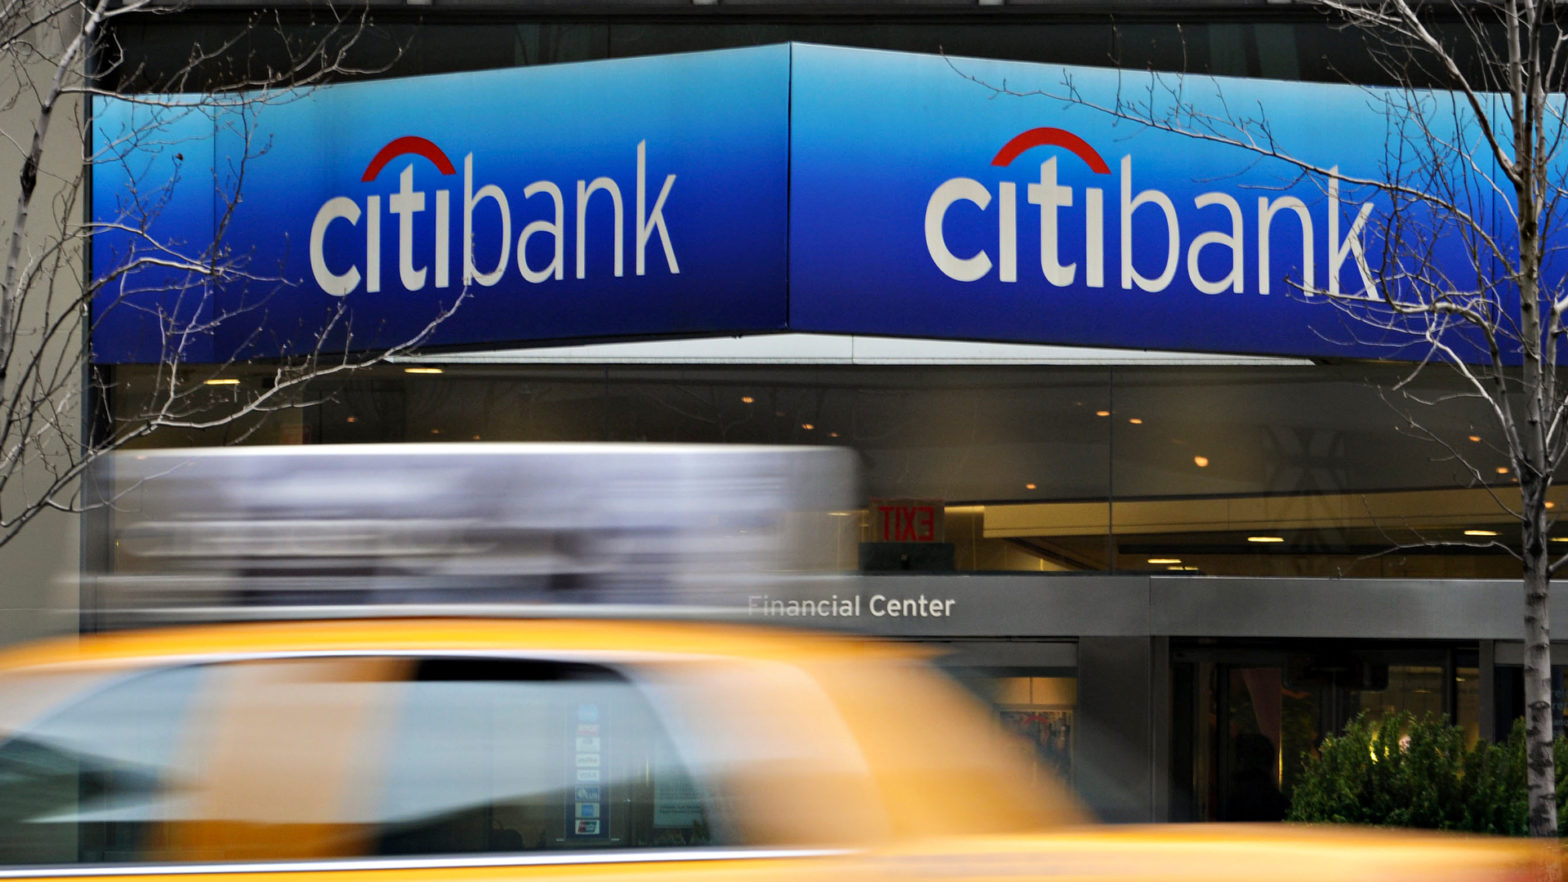 Citi Fulfills Follows Through As 'The Only Top Five U.S. Bank, Based On Assets' To Eliminate Overdraft Fees